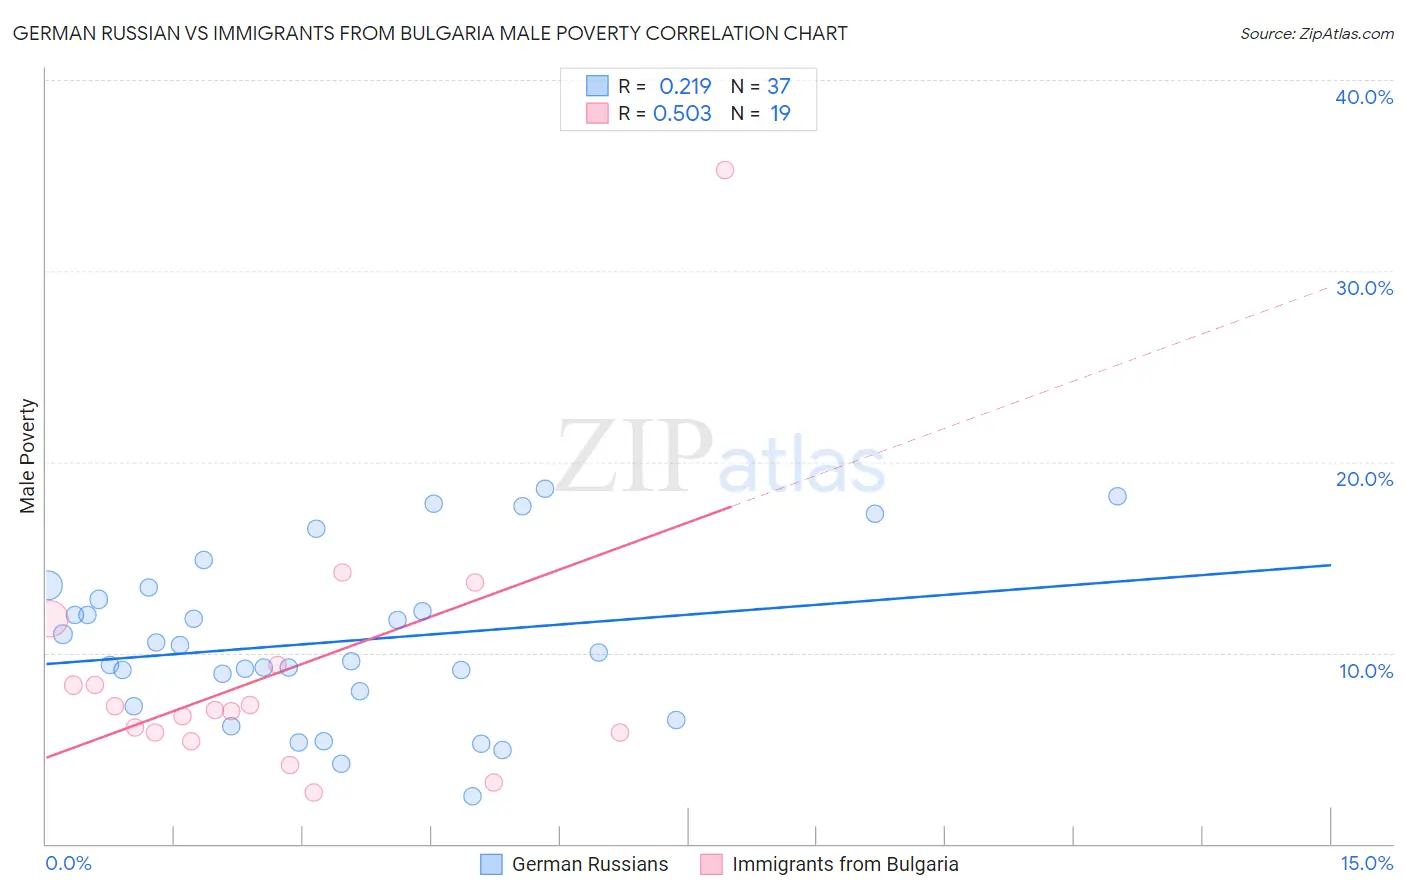 German Russian vs Immigrants from Bulgaria Male Poverty